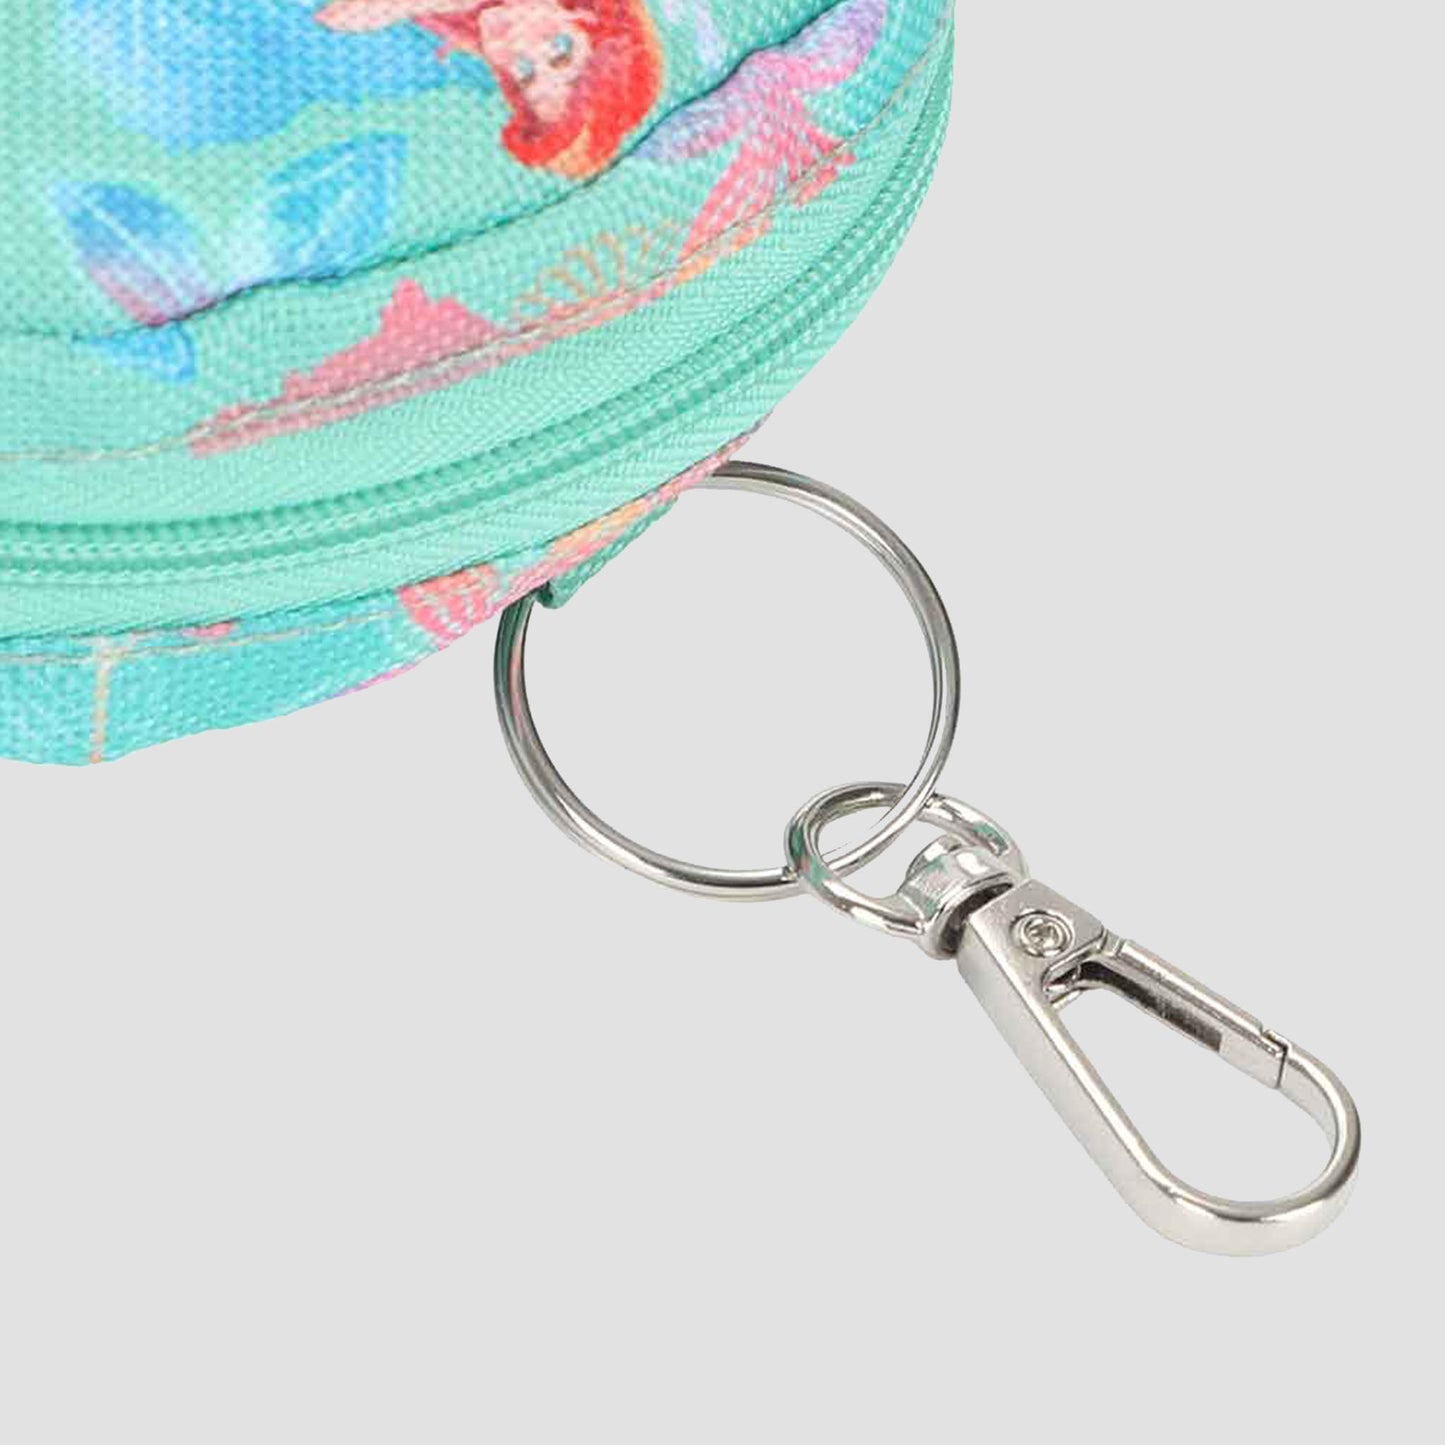 Iridescent Mini Backpack Coin Purse Keychains